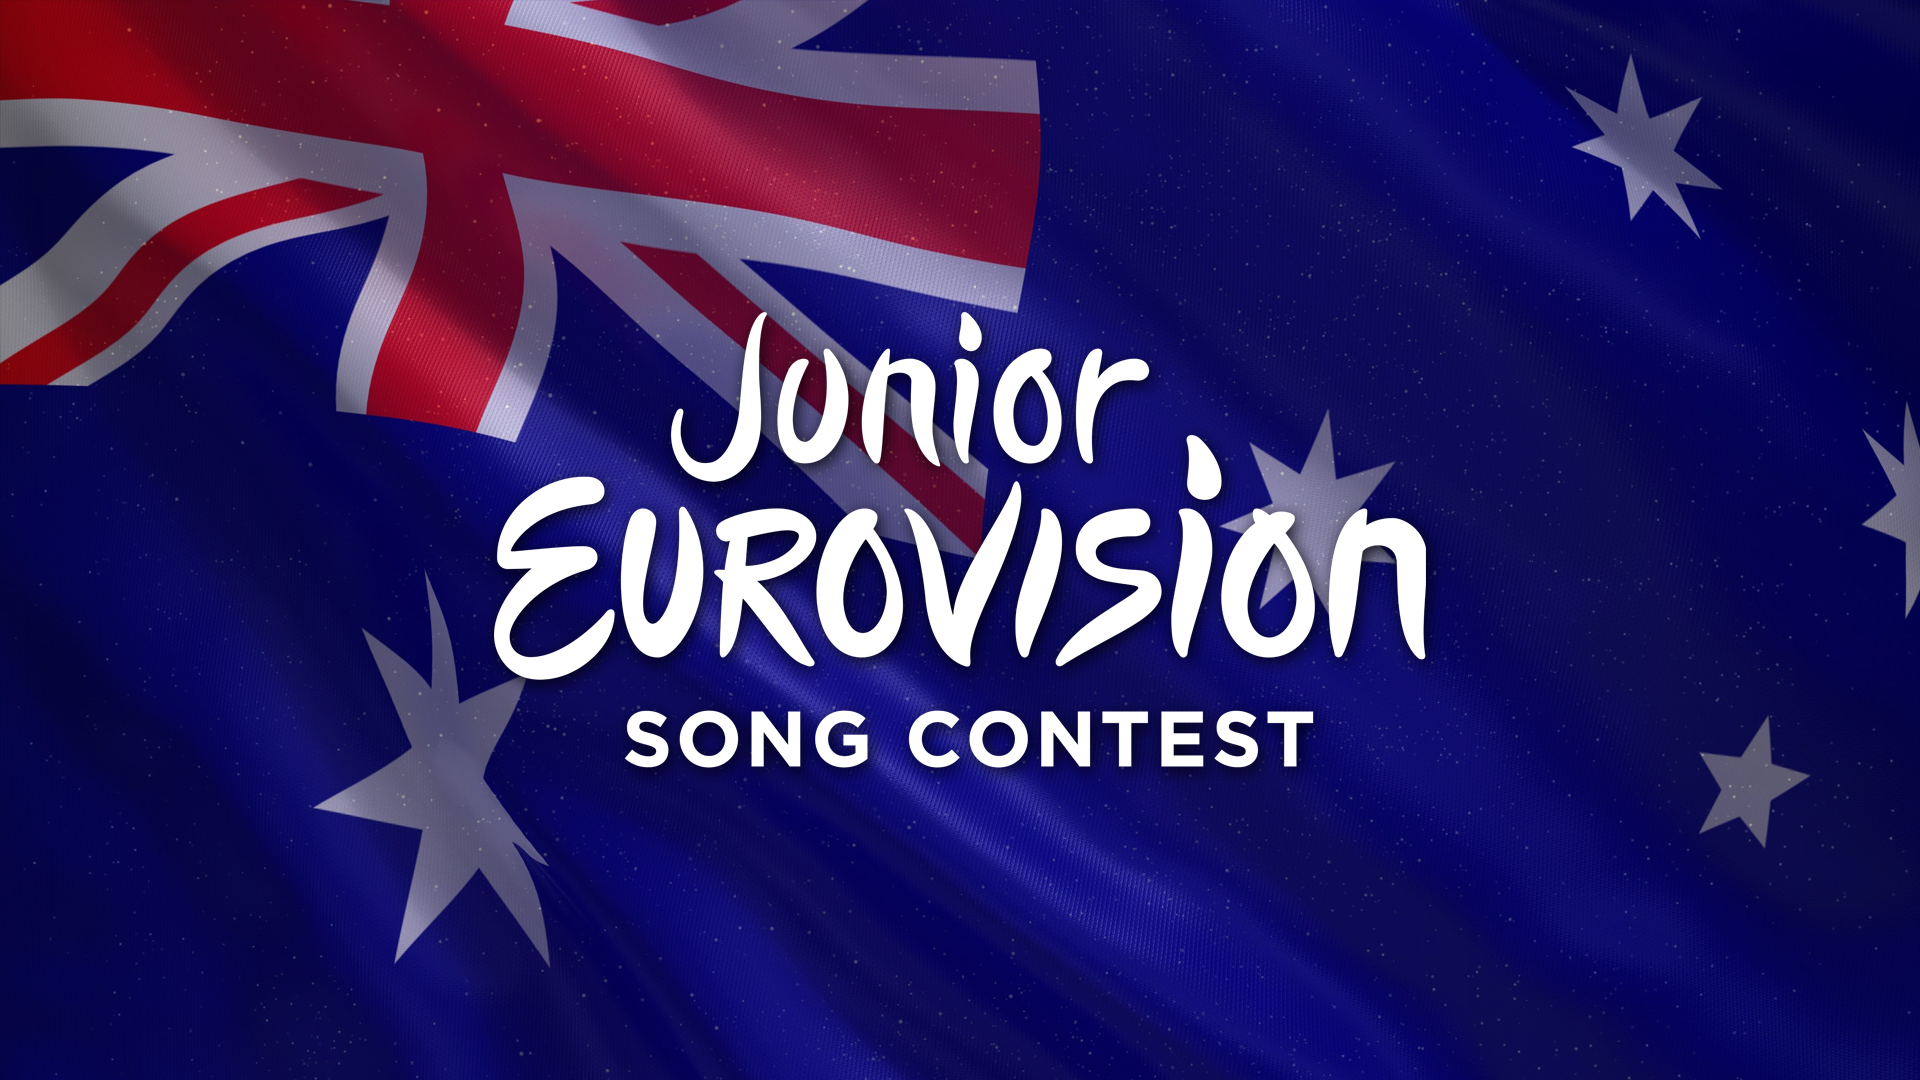 Will we see Australia compete at Junior Eurovision 2021?